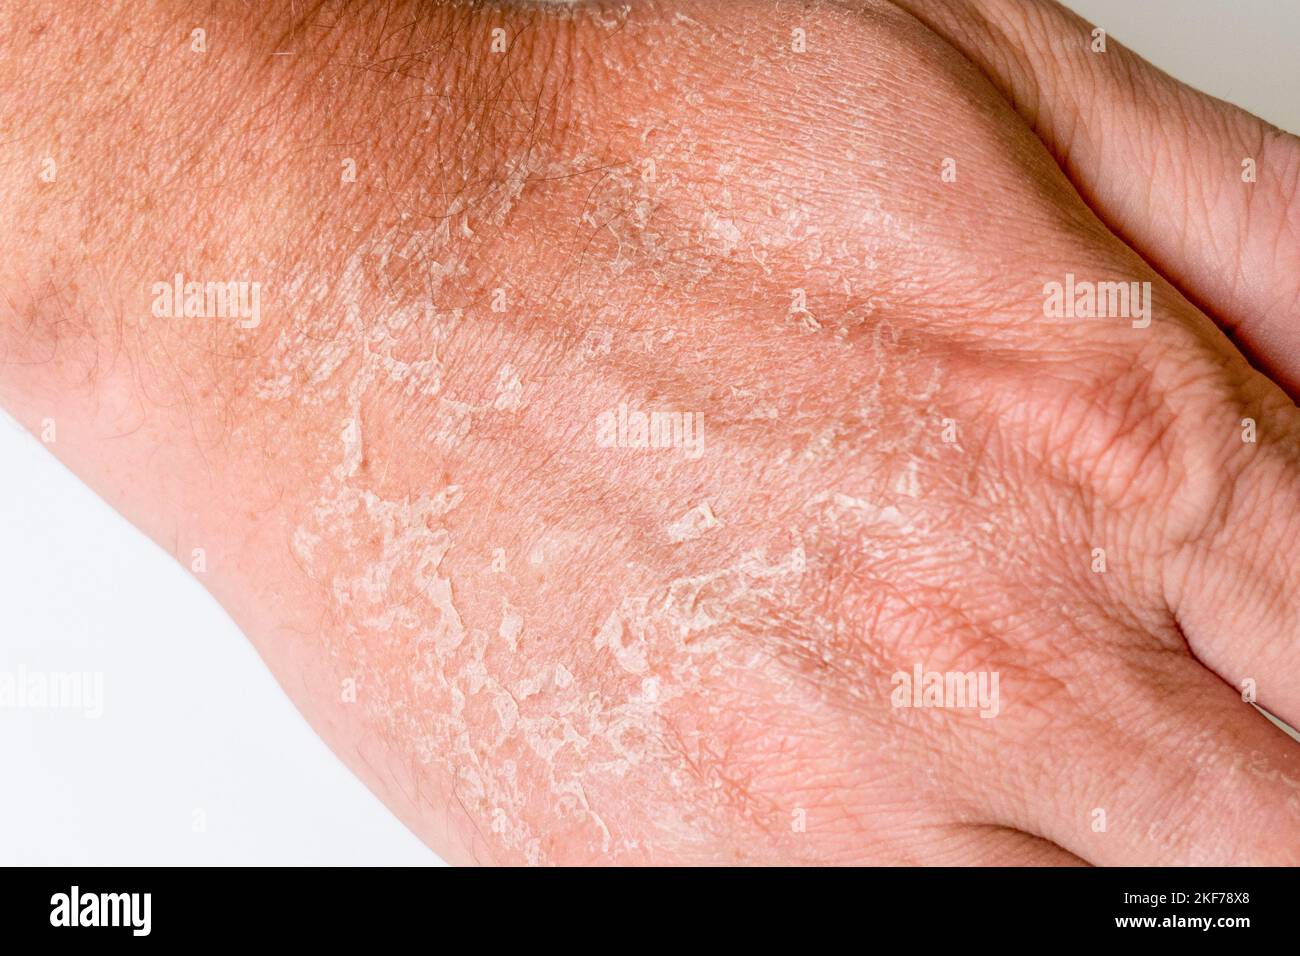 skin peels off the hand after a sunburn close-up isolate. Stock Photo